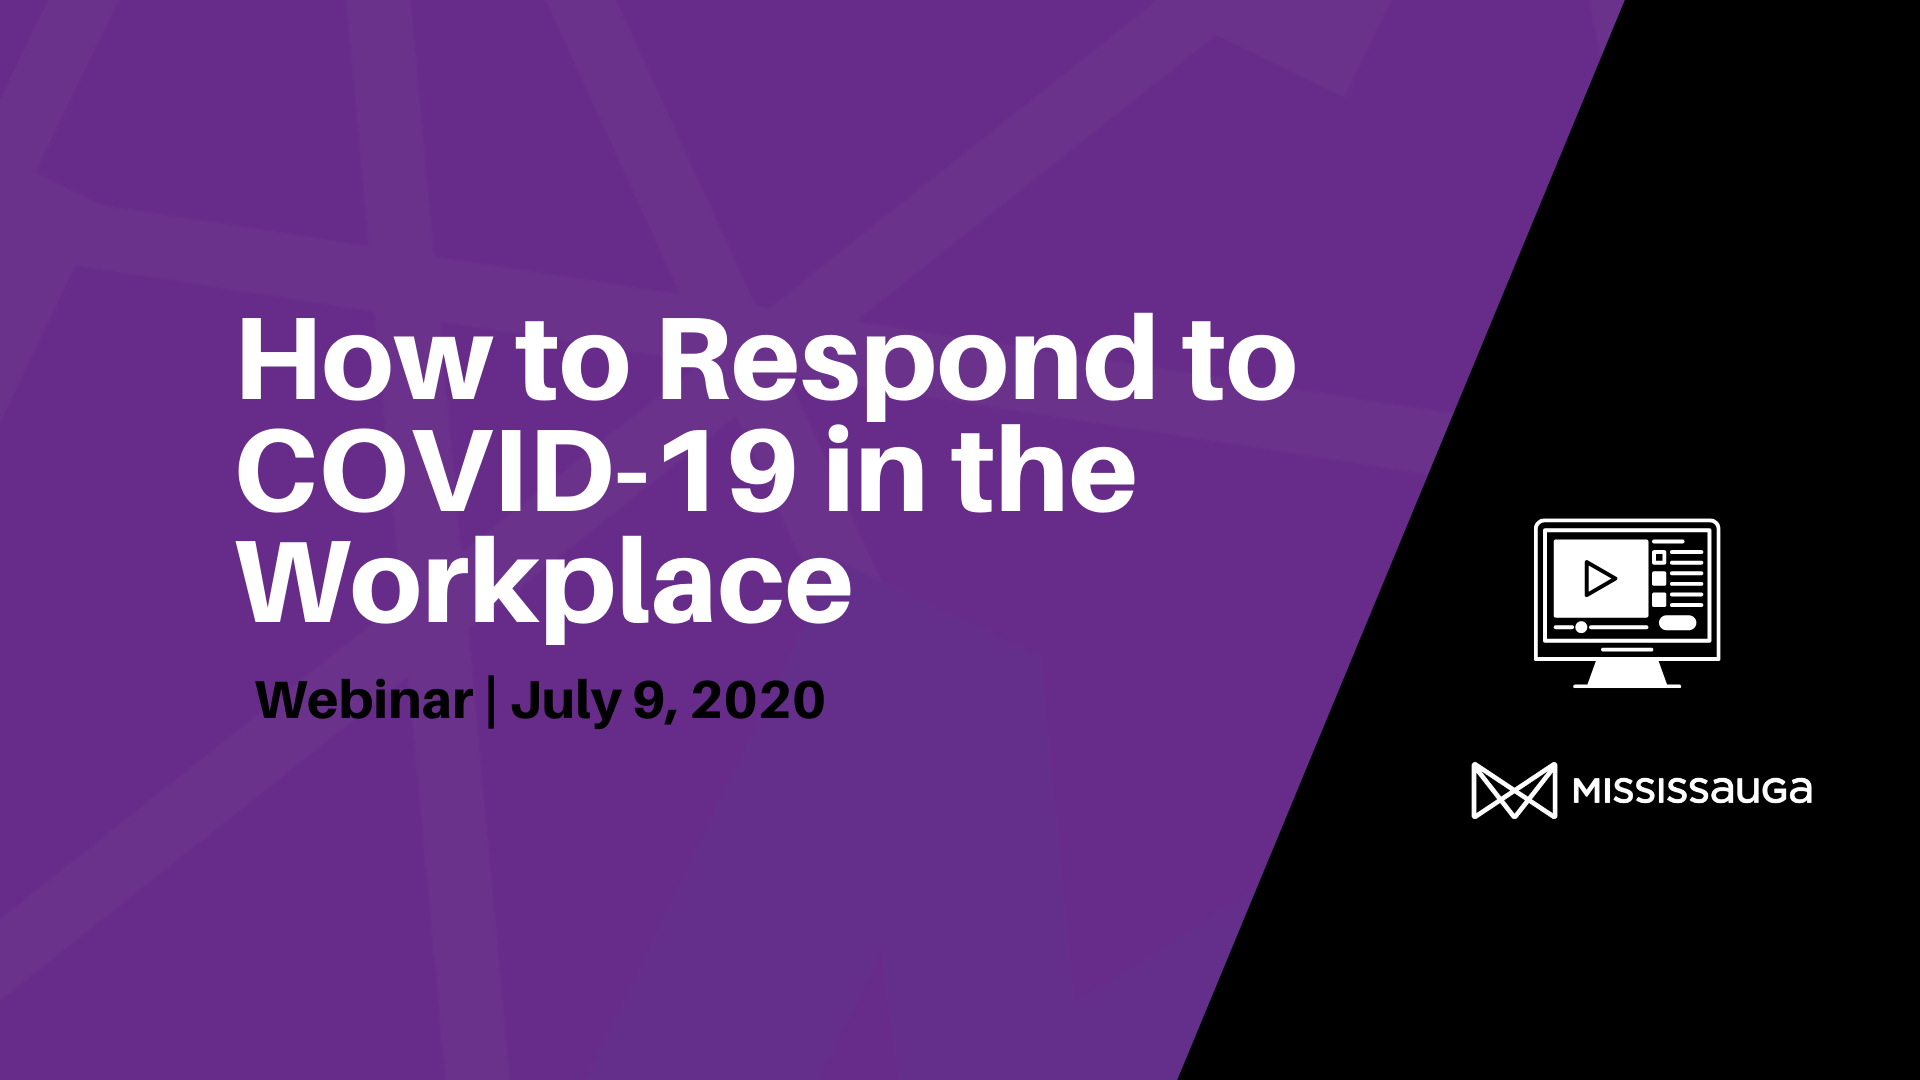 You are currently viewing How to Respond to COVID-19 in the Workplace – Webinar, Jul 9